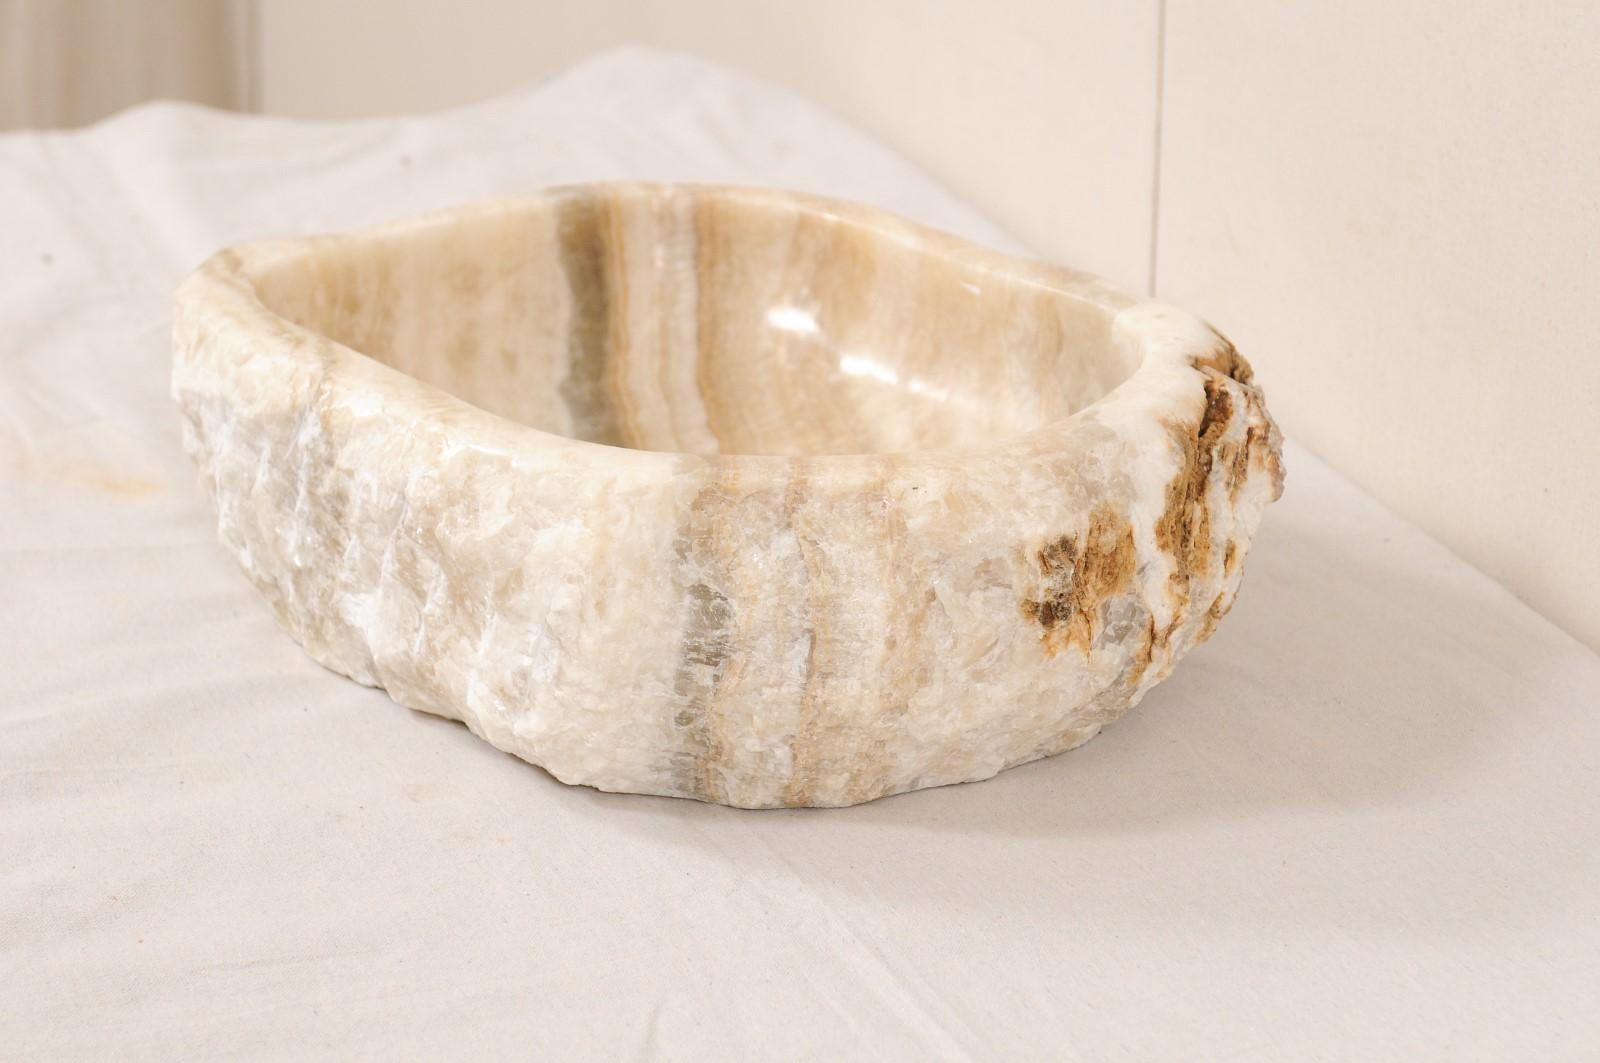 Carved Cream Colored Natural Polished Onyx Sink Basin